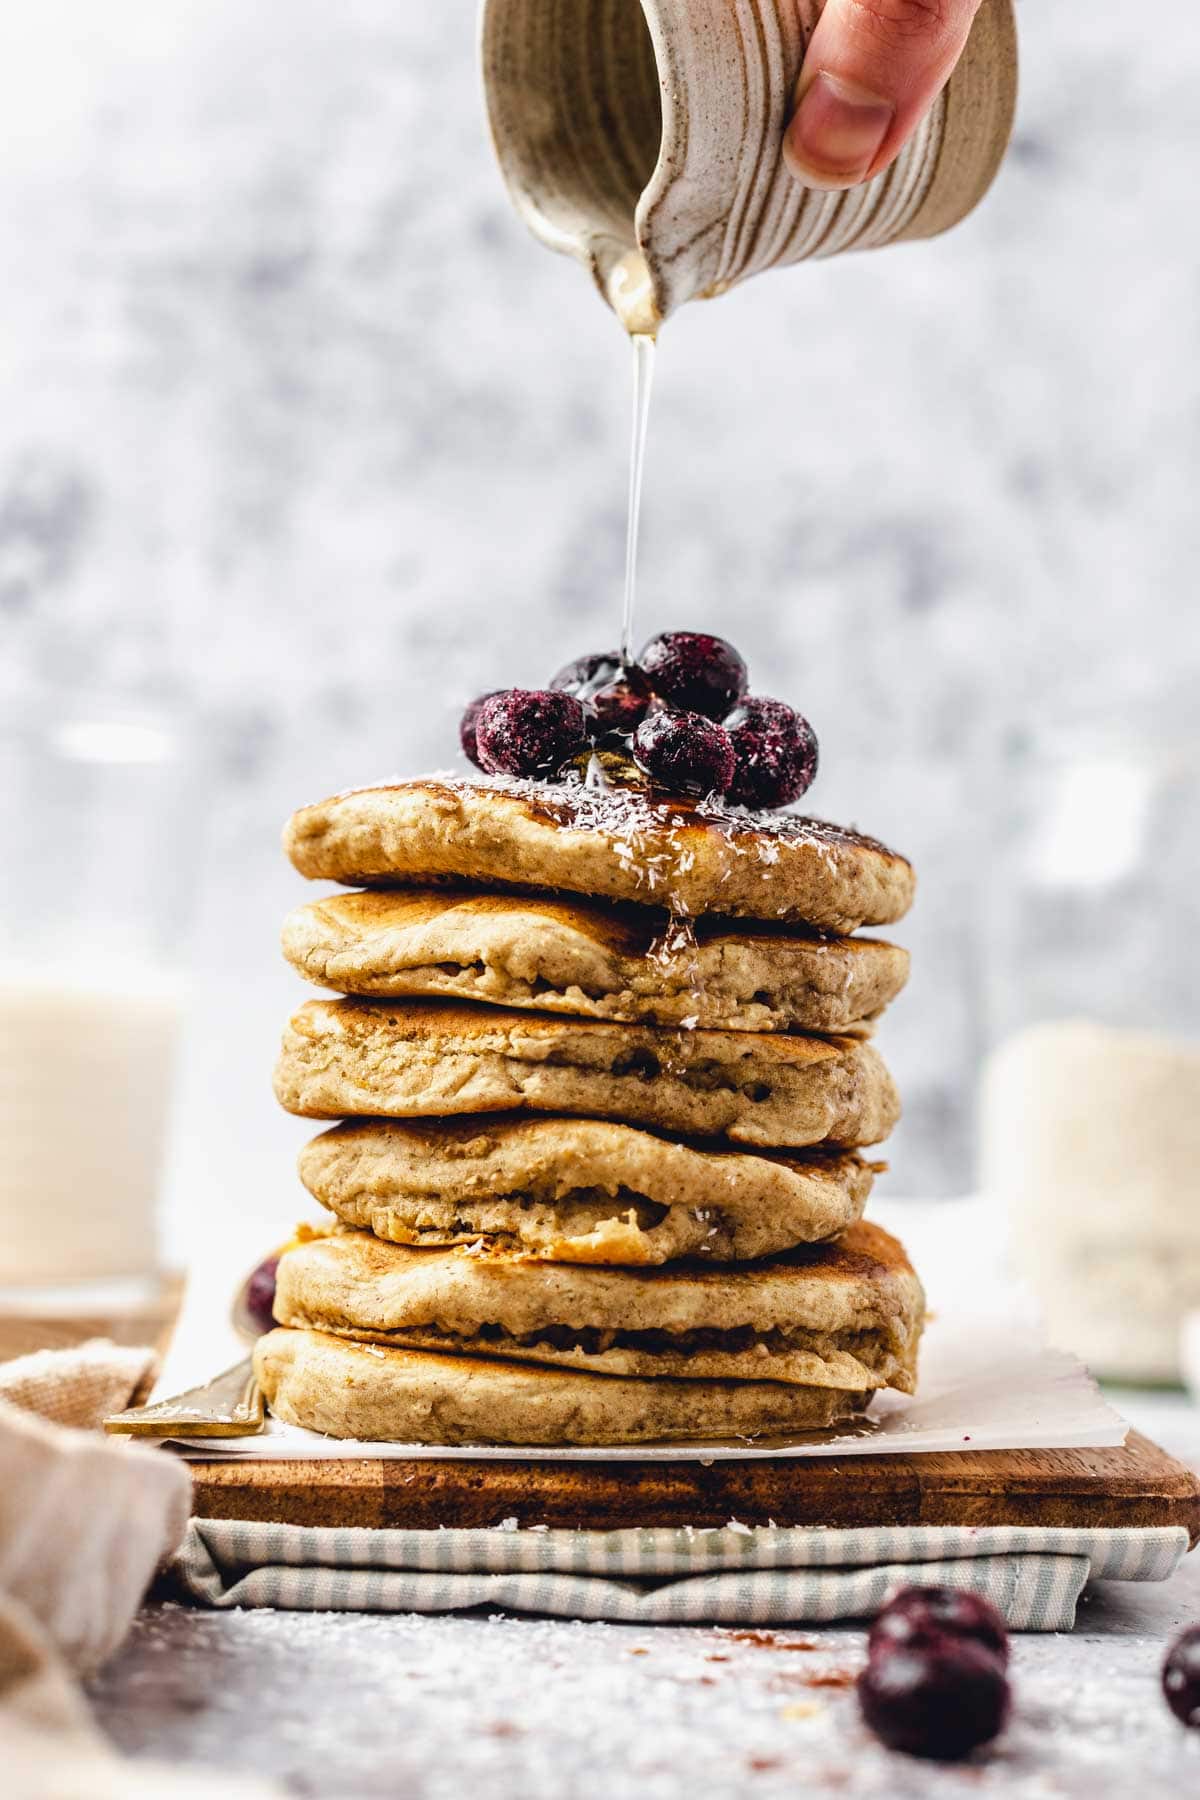 Syrup being poured over a stack of vegan pancakes.